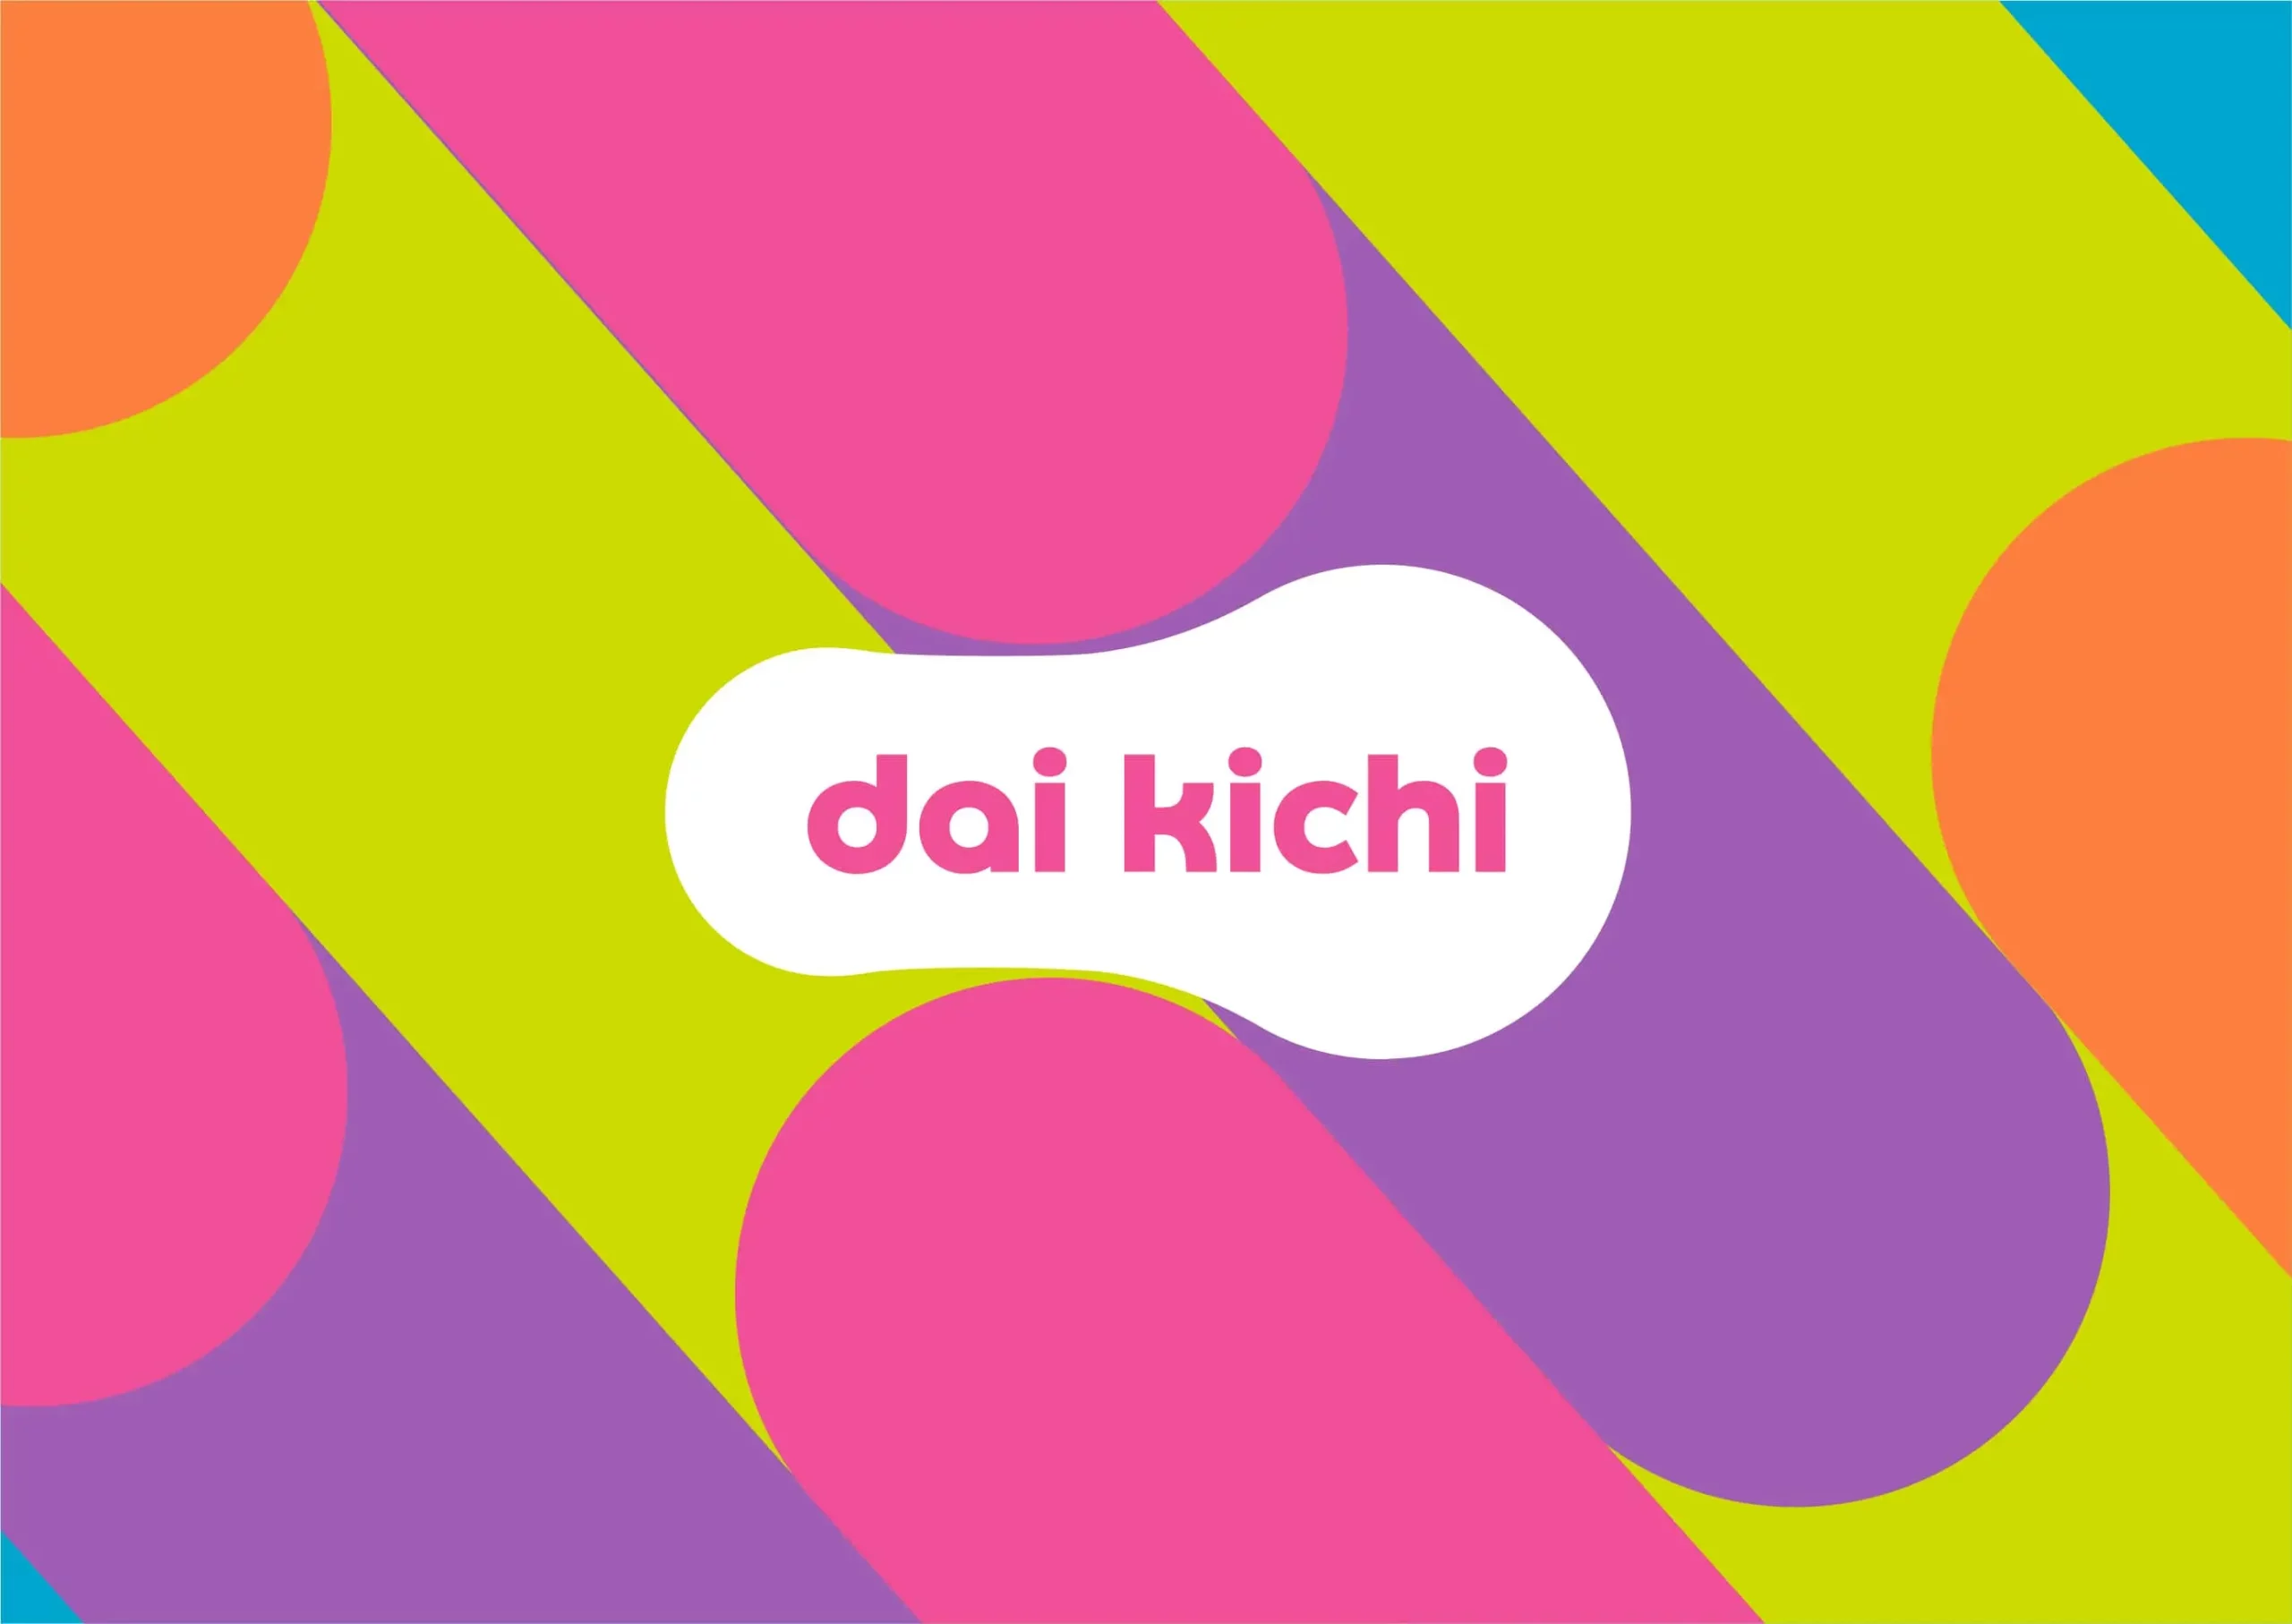 A colorful background with the word dai kichi.